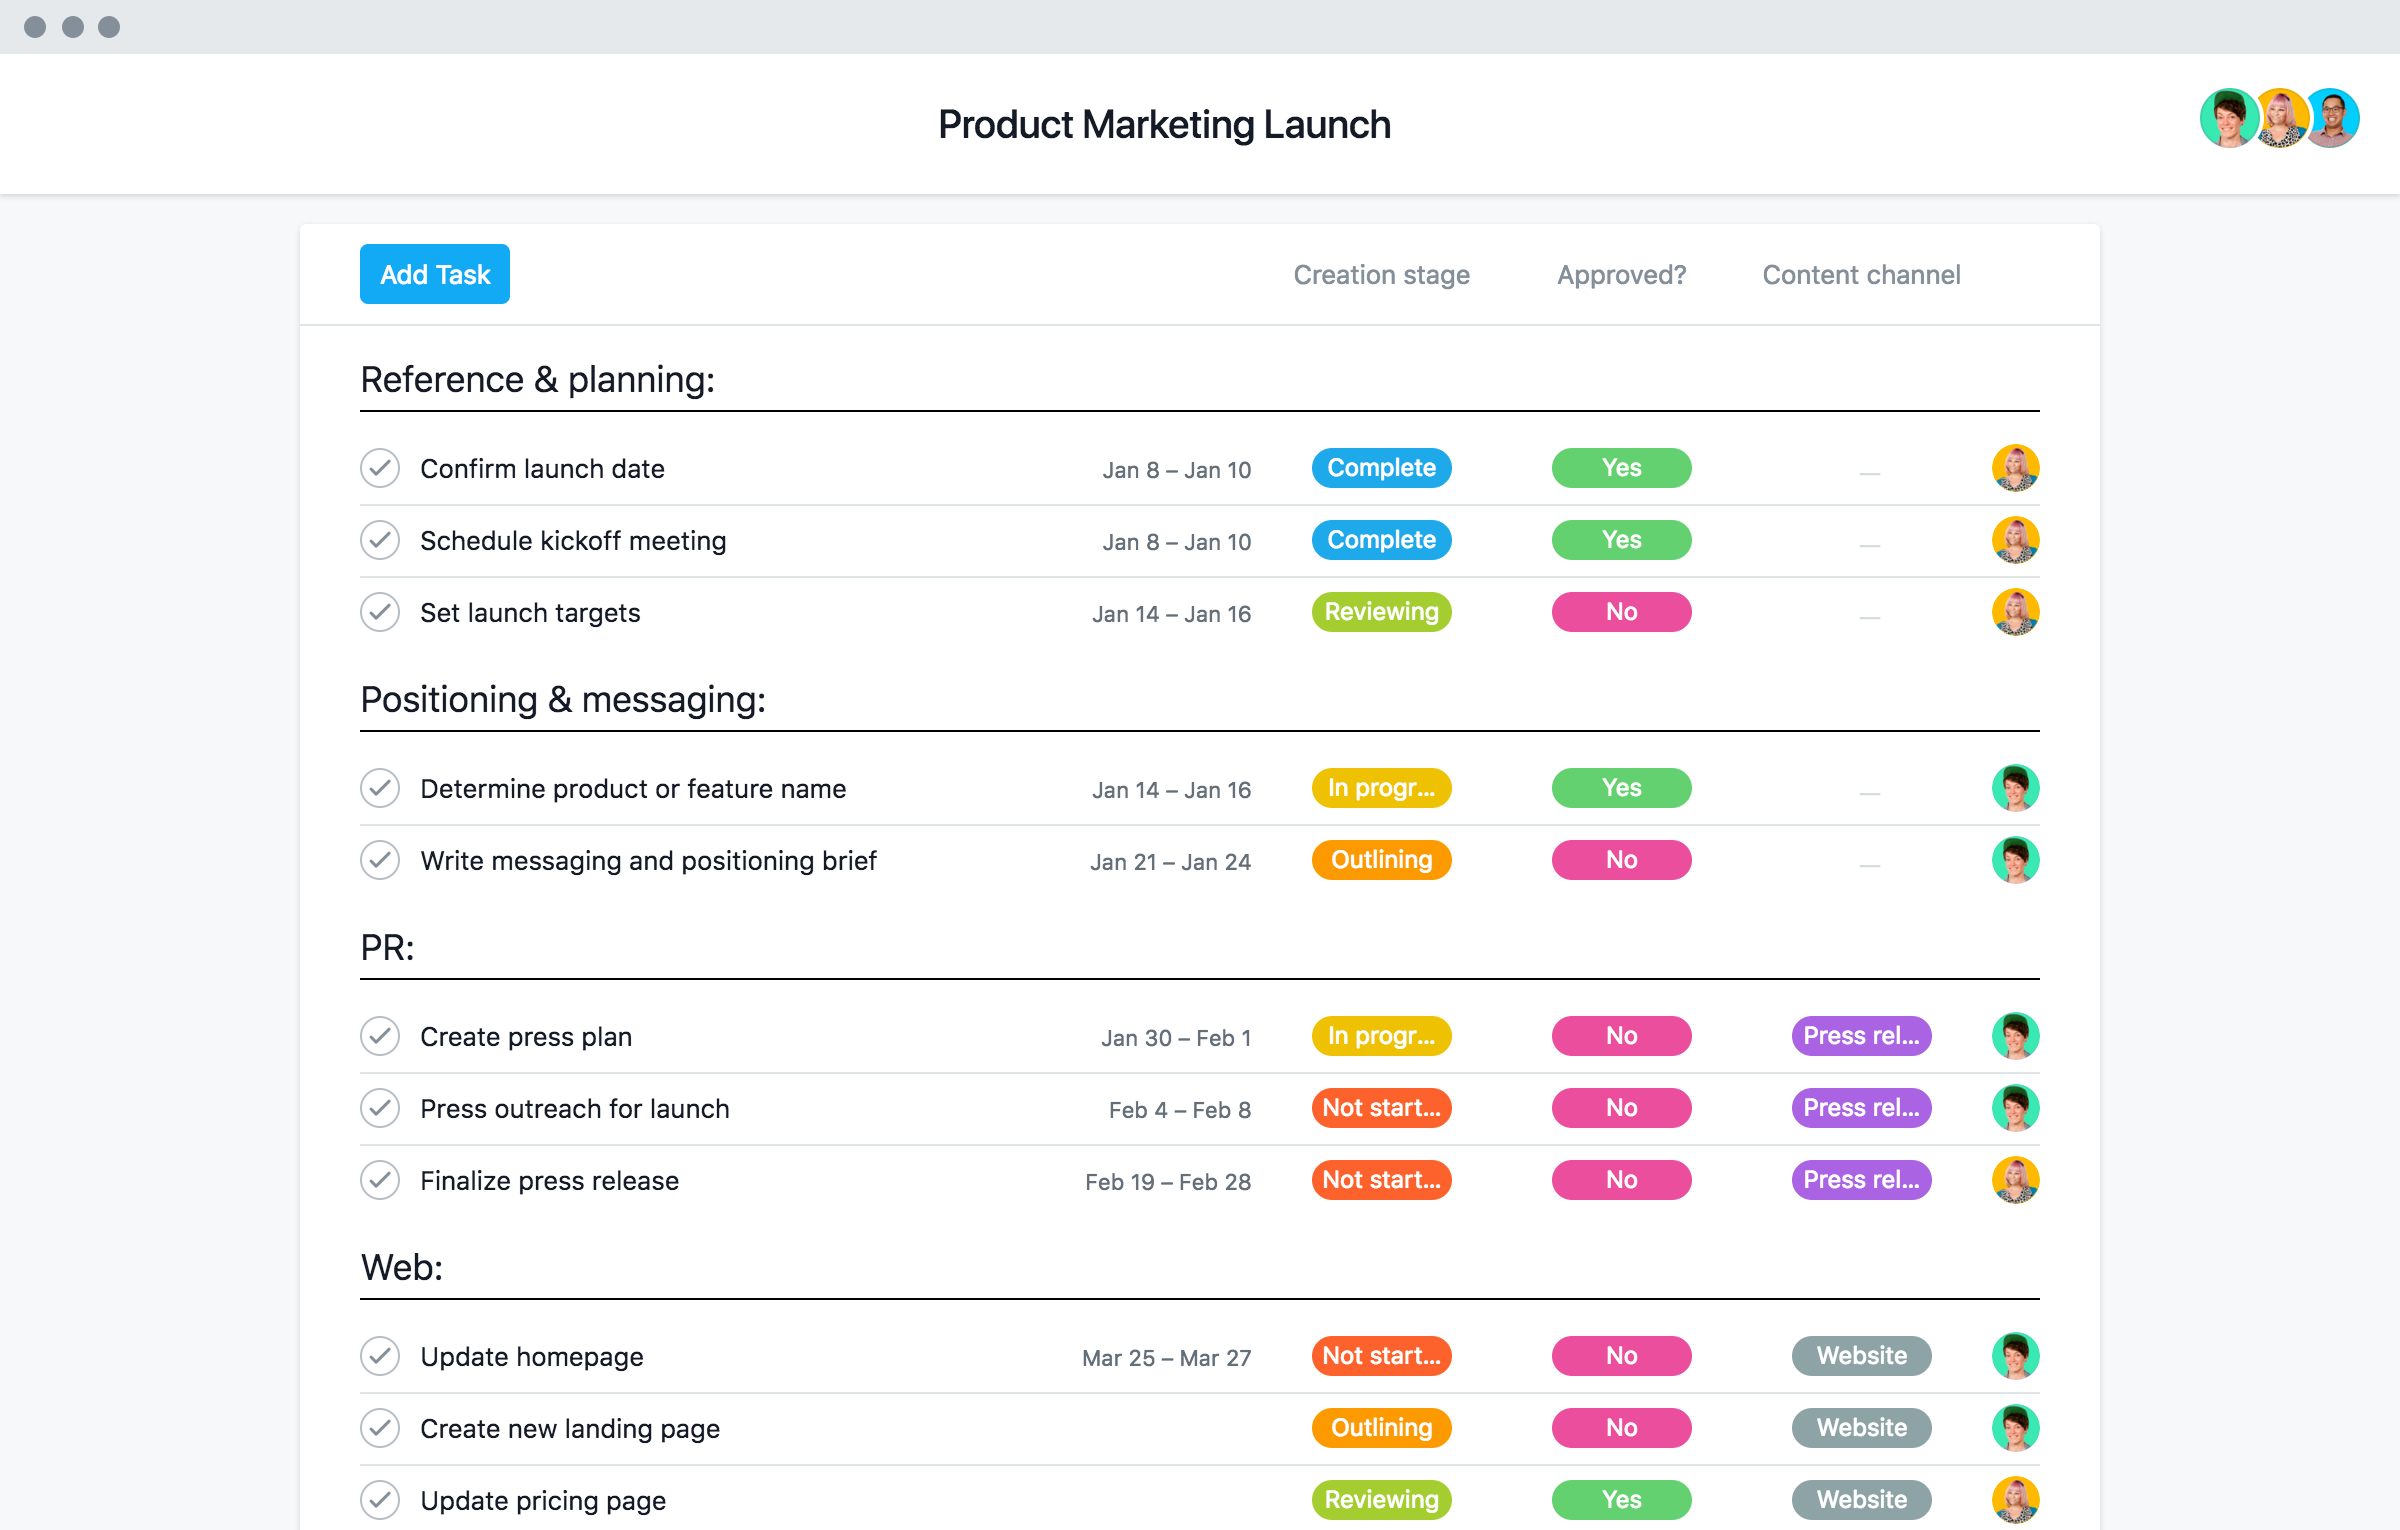 product marketing plan template, new product marketing plan template, product launch marketing plan template, new product launch marketing plan template, marketing and promotion plan template, marketing comms plan template